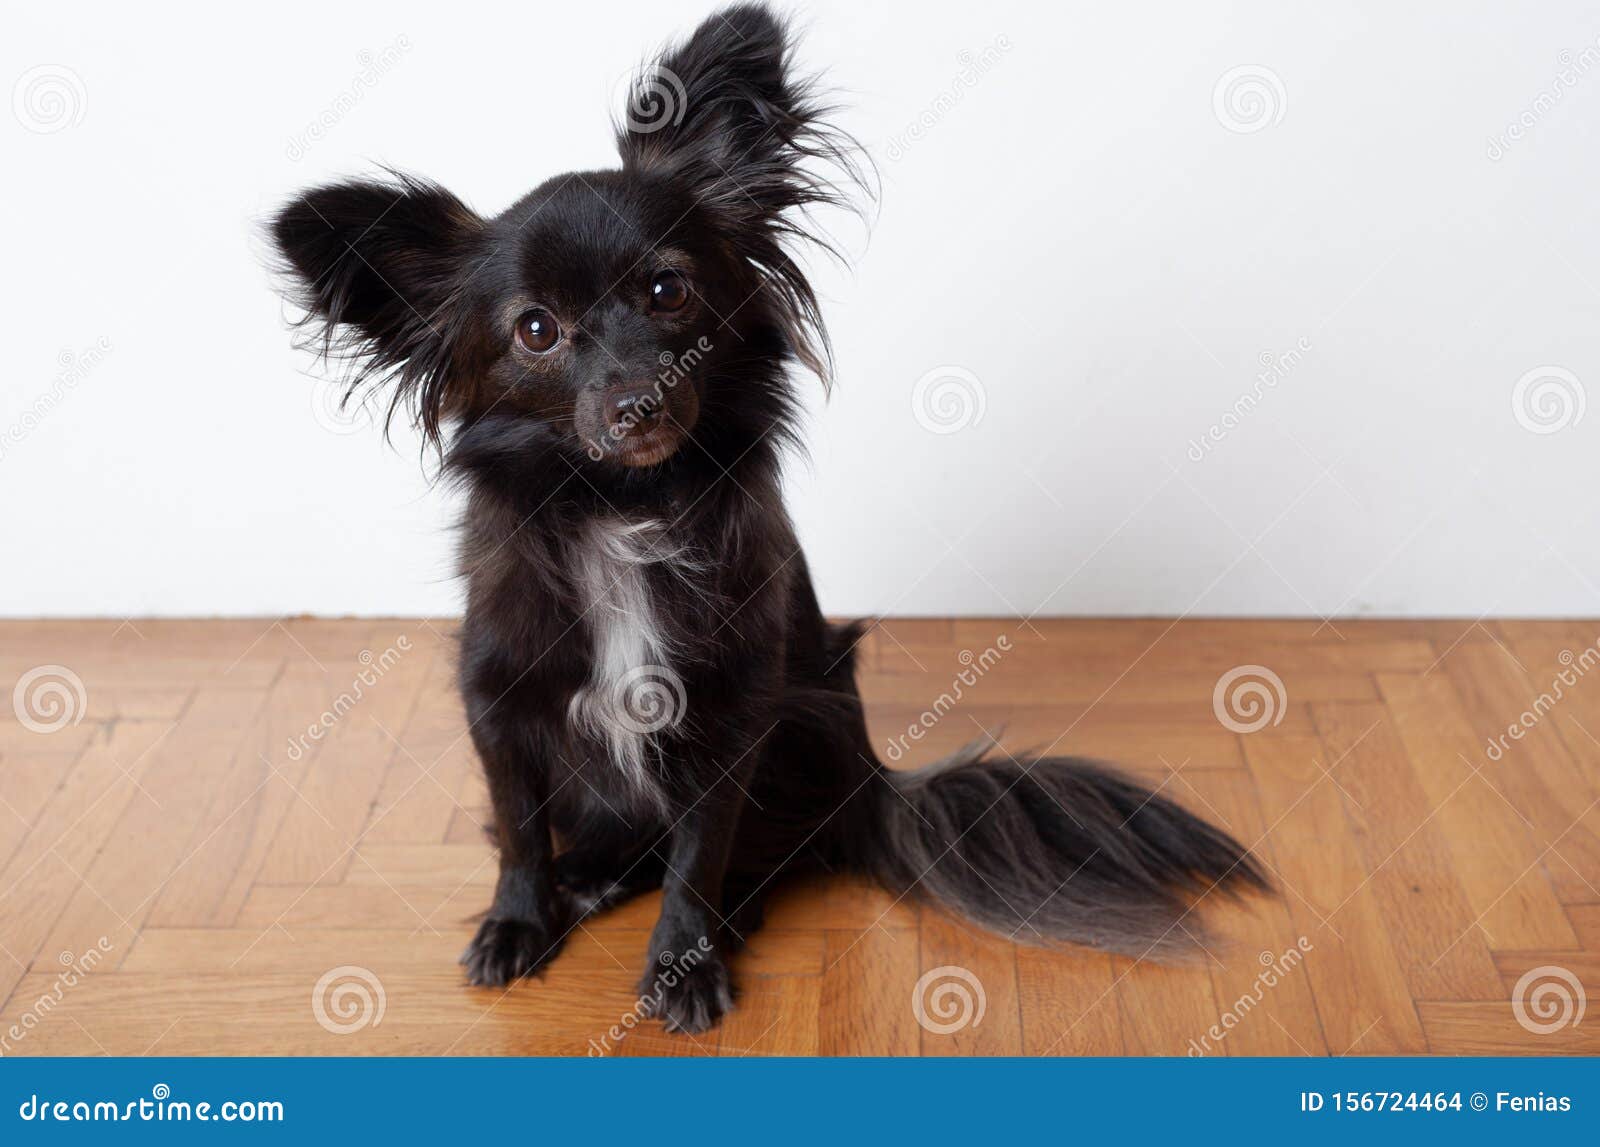 small dog with long ears